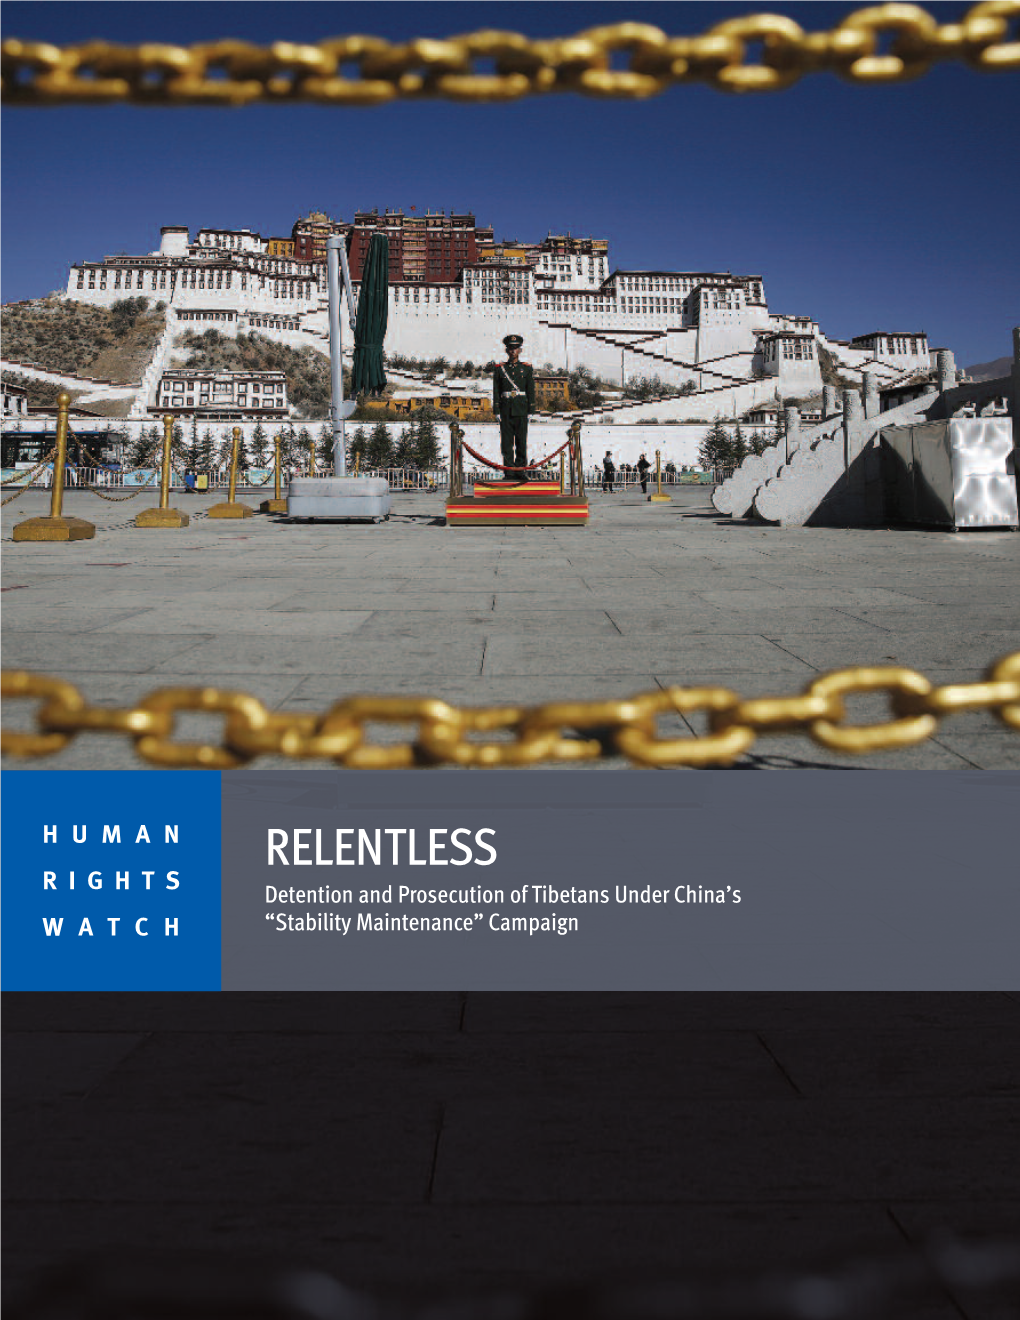 RELENTLESS RIGHTS Detention and Prosecution of Tibetans Under China’S WATCH “Stability Maintenance” Campaign